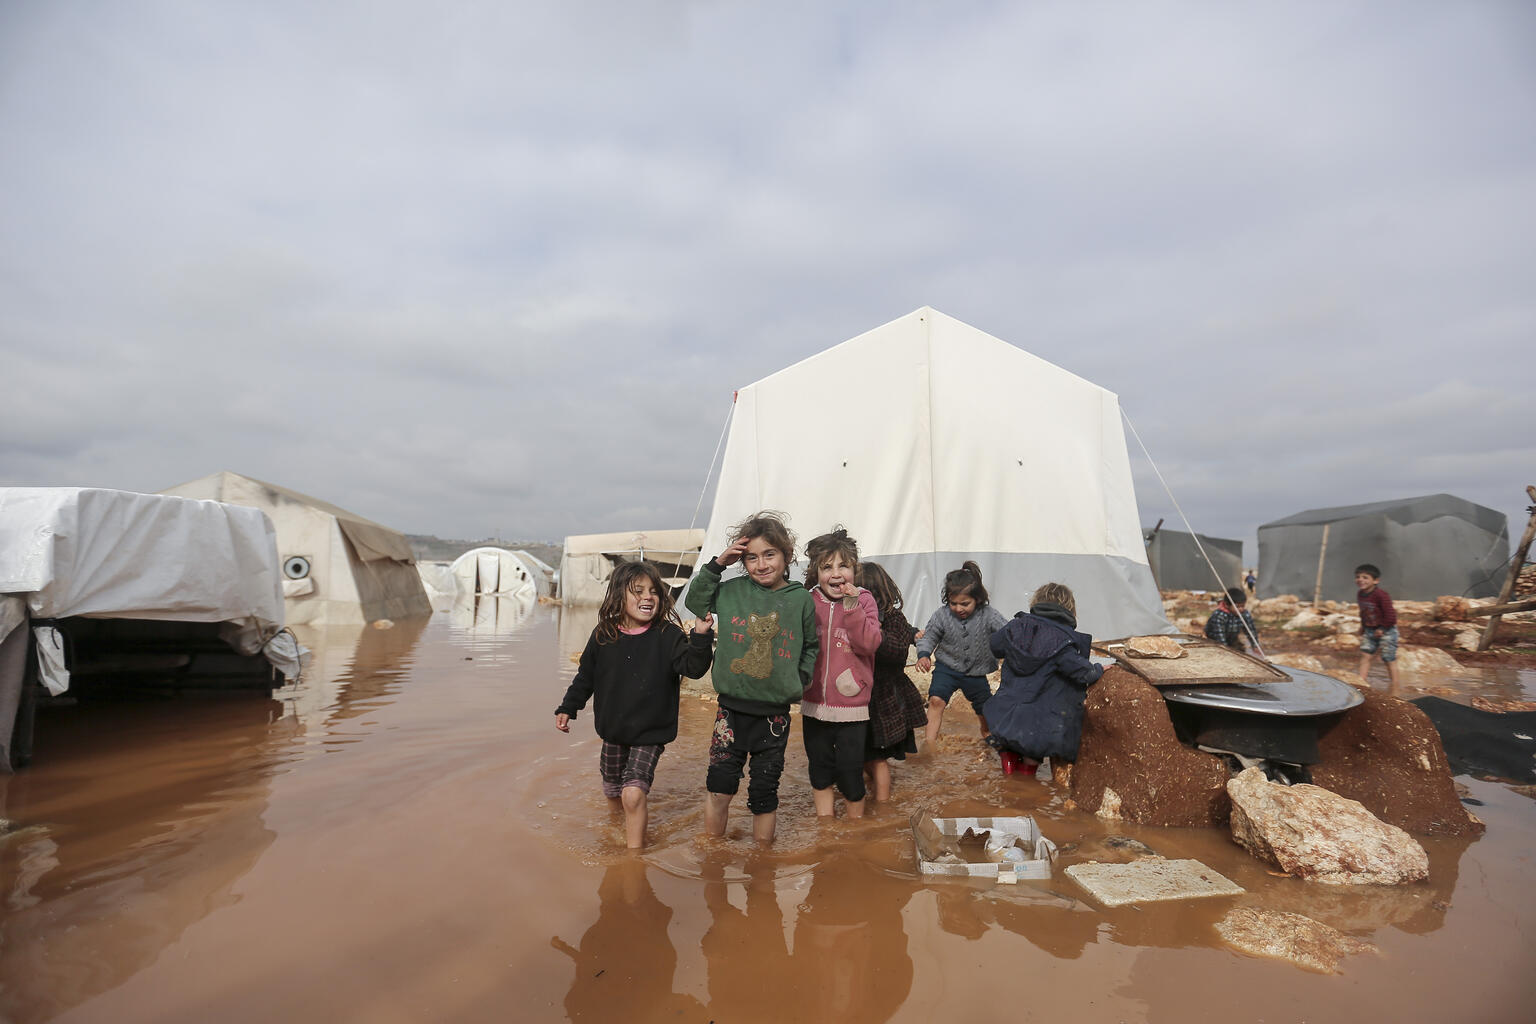 On 19 January 2021, children stand in a flooded area of Kafr Losin Camp in northwest Syrian Arab Republic. Over the past few days, western Aleppo and Idlib governorates in the northwest of the country have been experiencing some of the heaviest winter storms so far this season. The heavy rainfall has flooded tents and cut off roads leading to camps for internally displaced families. While the damage continues to be assessed, there are reports of more than 1,700 households in the area have been affected.